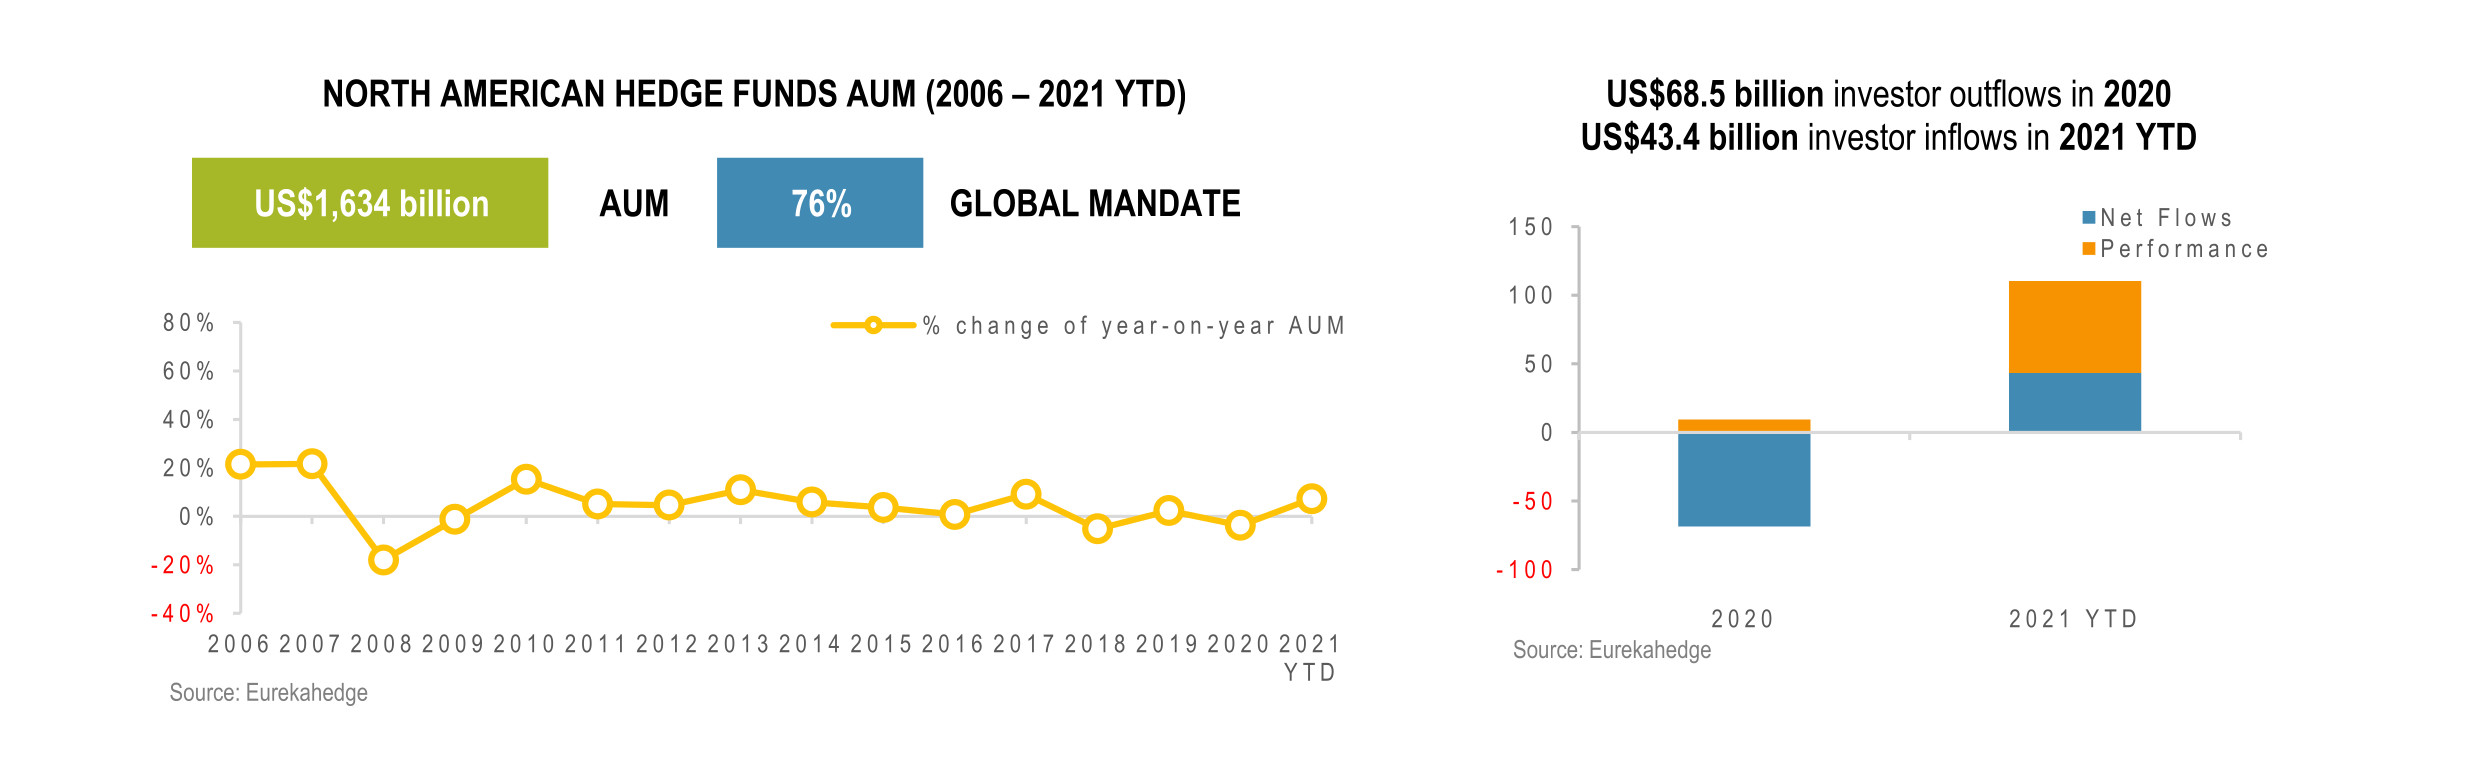 North American Hedge Funds Infographic January 2022 - AUM